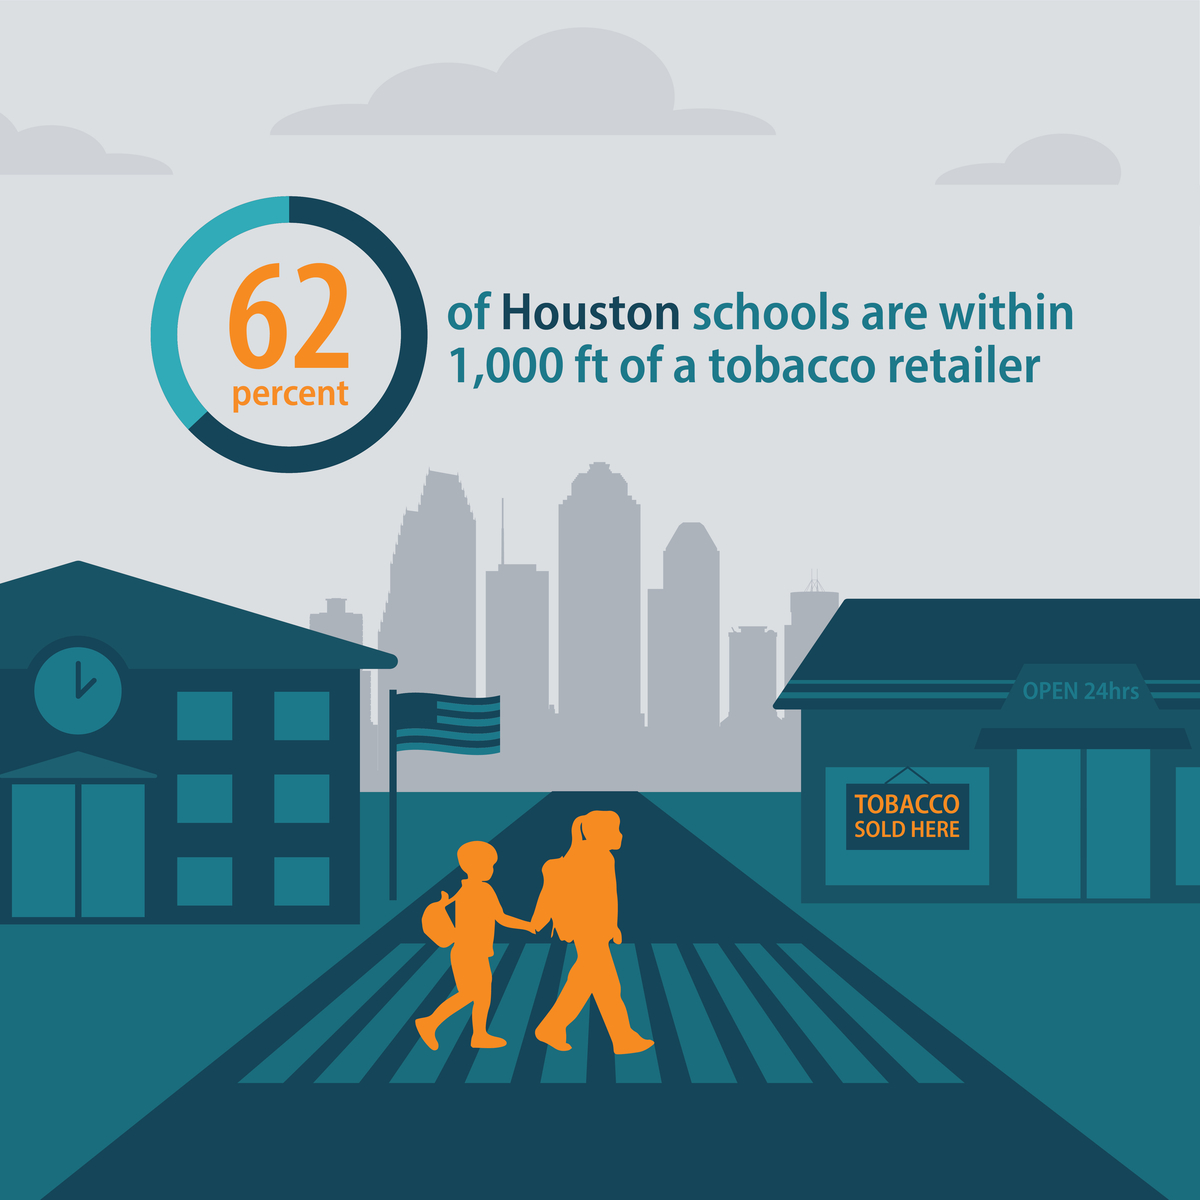 62 percent of Houston schools are within 1,000 feet of a tobacco retailer